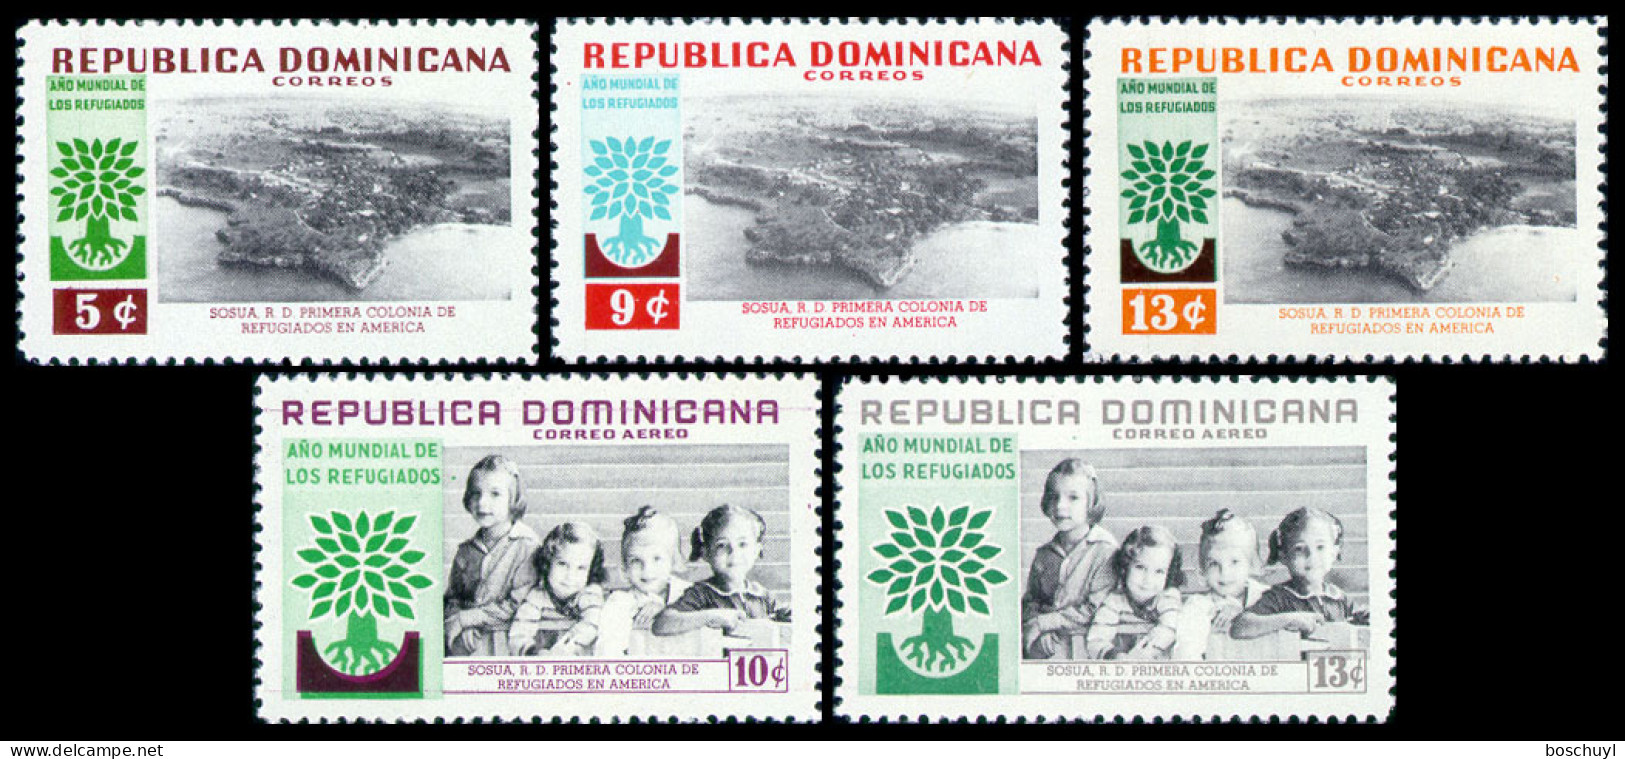 Dominican Republic, 1960, World Refugee Year, WRY, United Nations, MNH, Michel 712-716 - Réfugiés